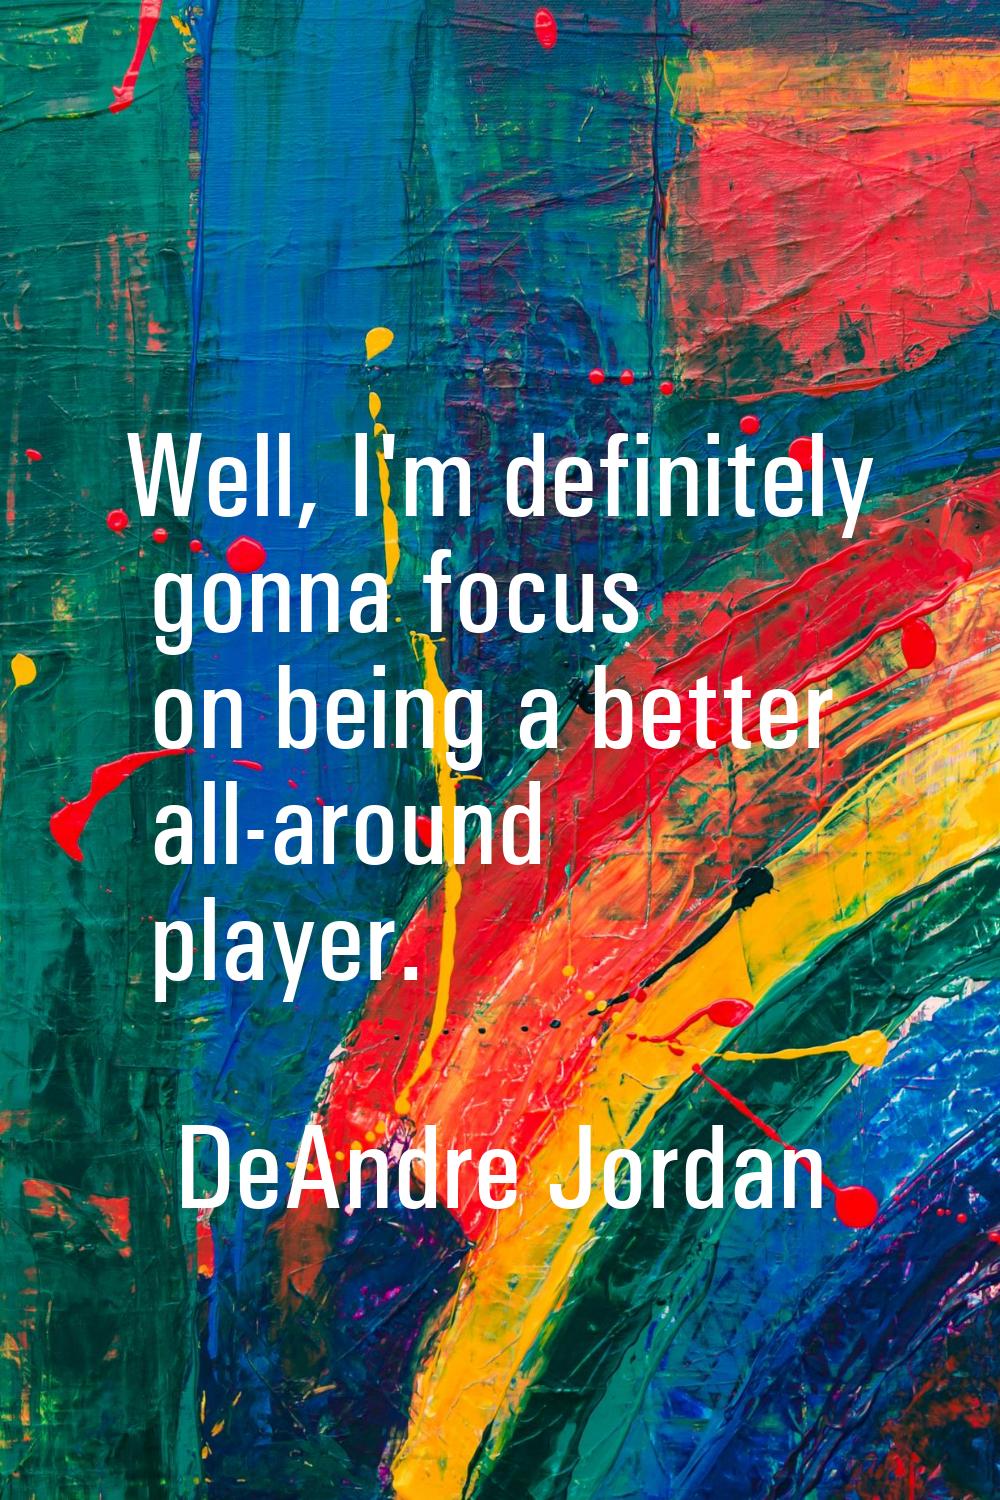 Well, I'm definitely gonna focus on being a better all-around player.